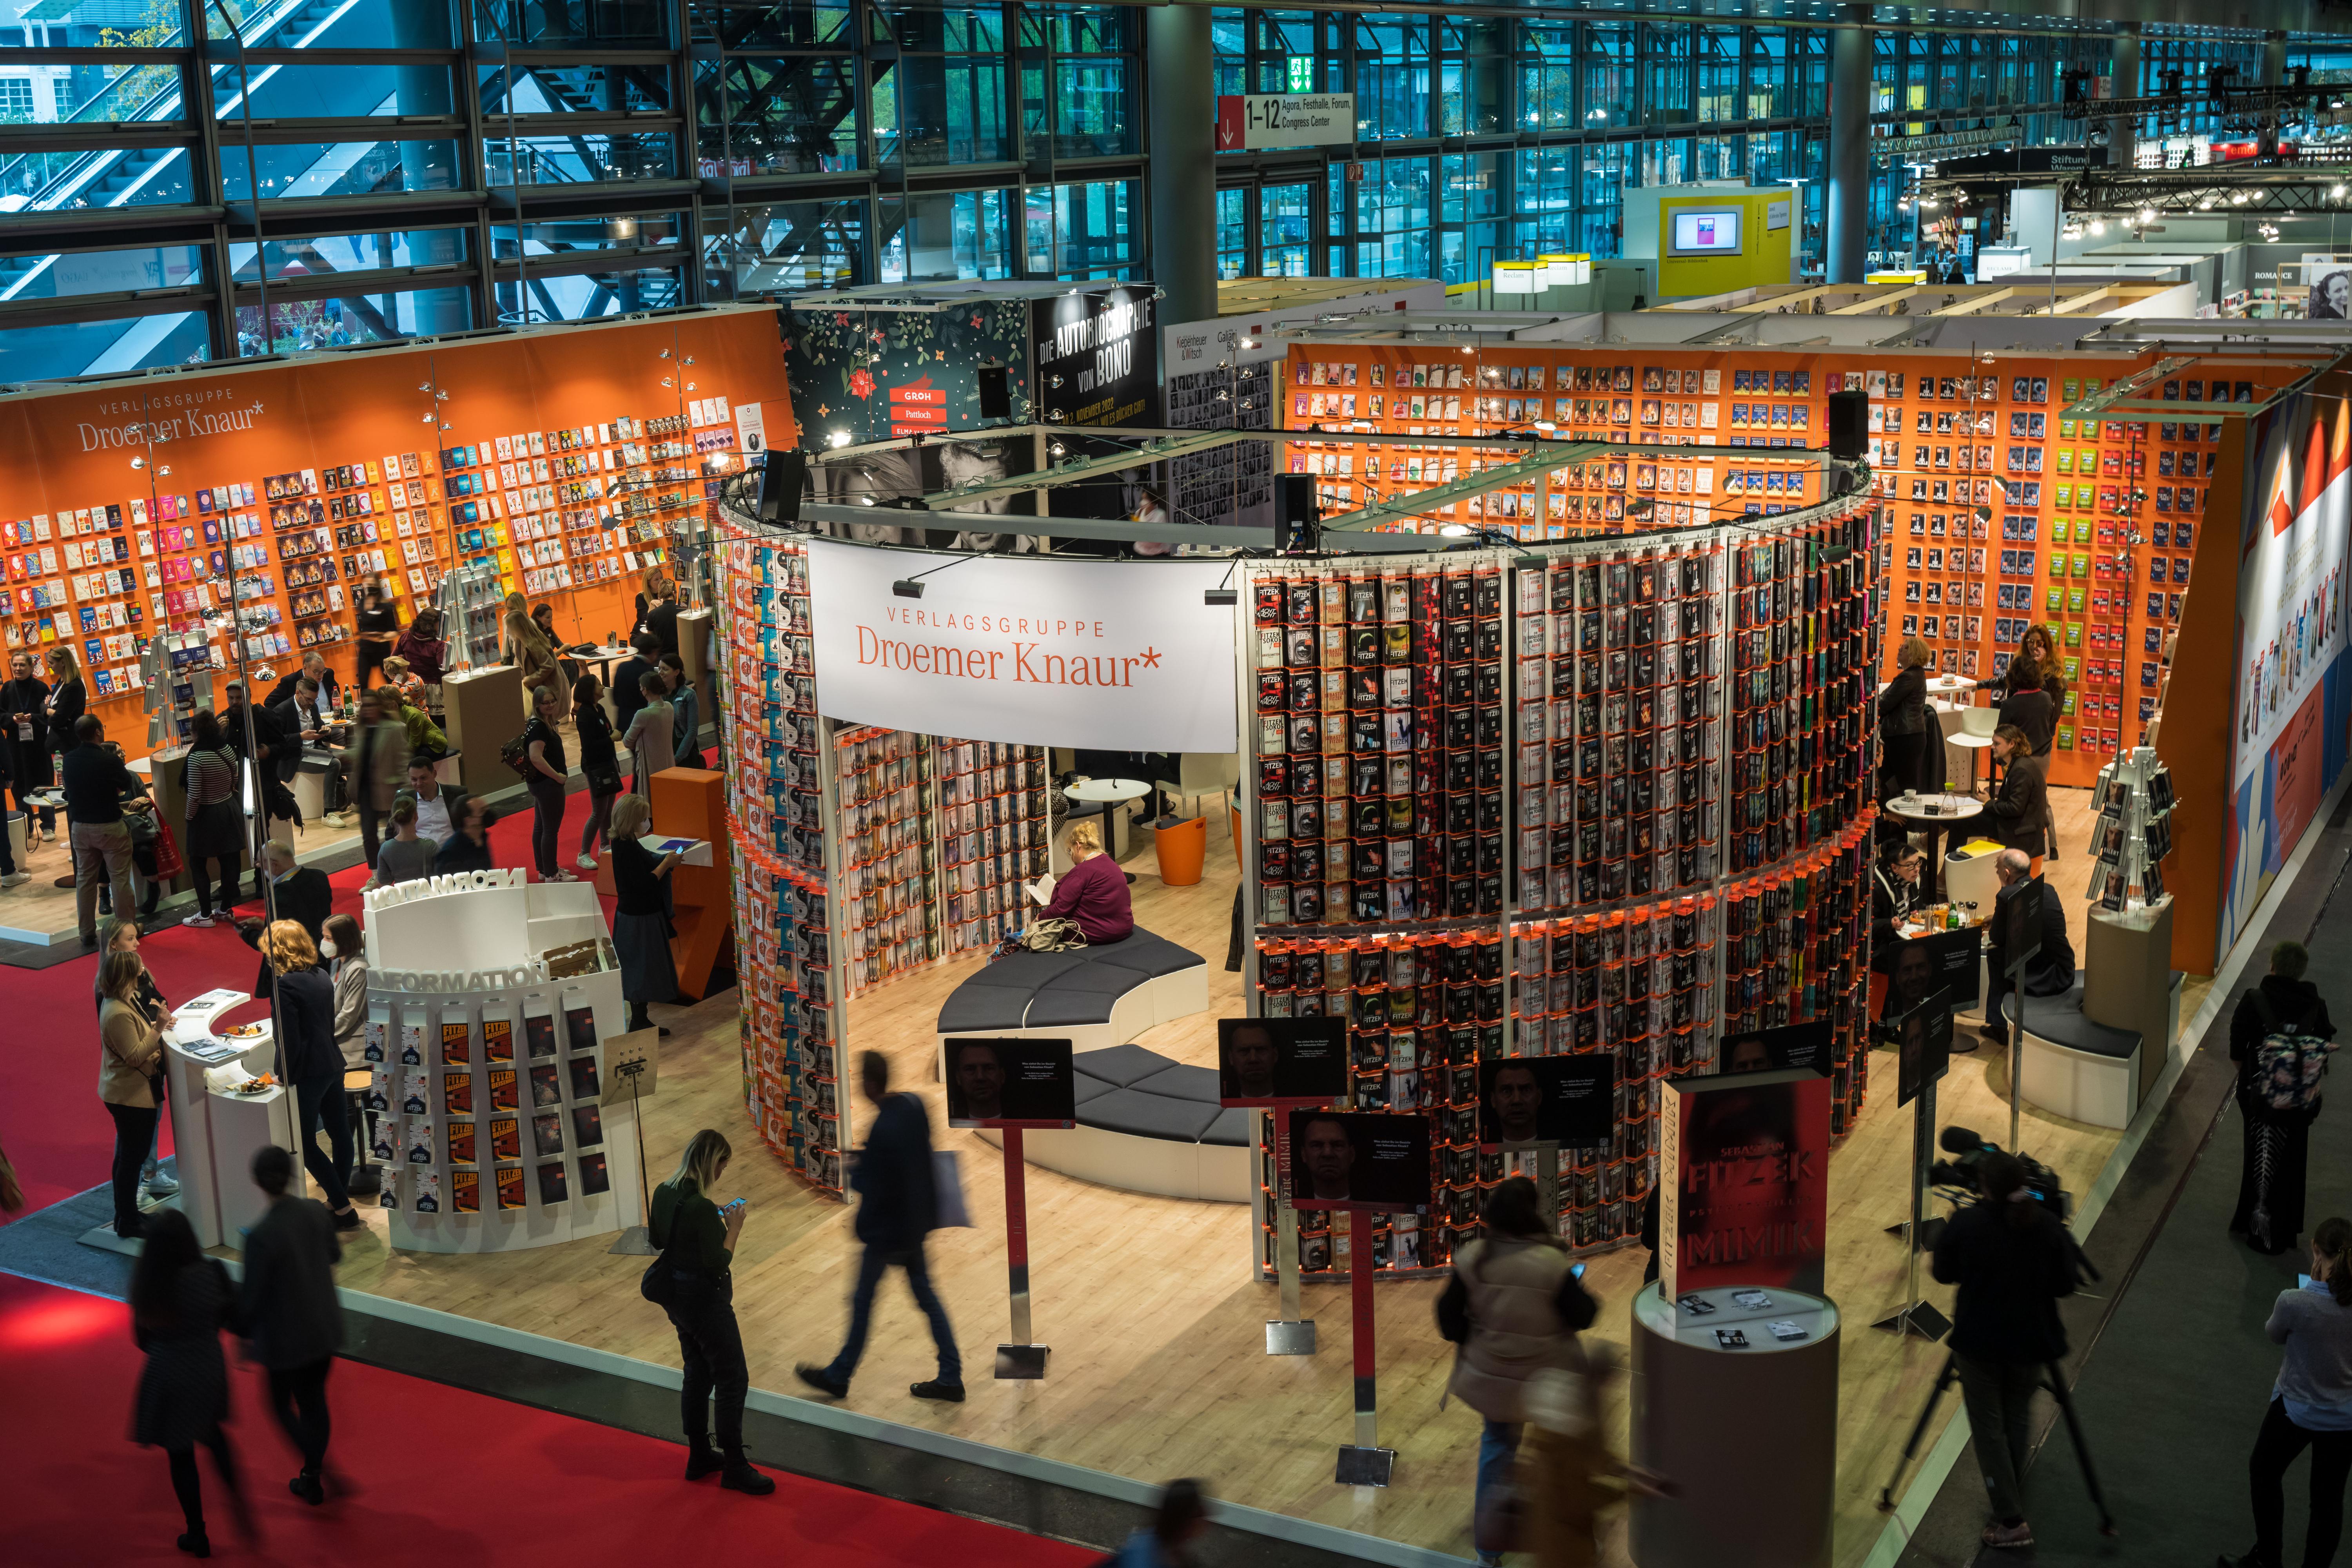 Exhibition stands at Frankfurt Book Fair 2022 packed with high walls of books 